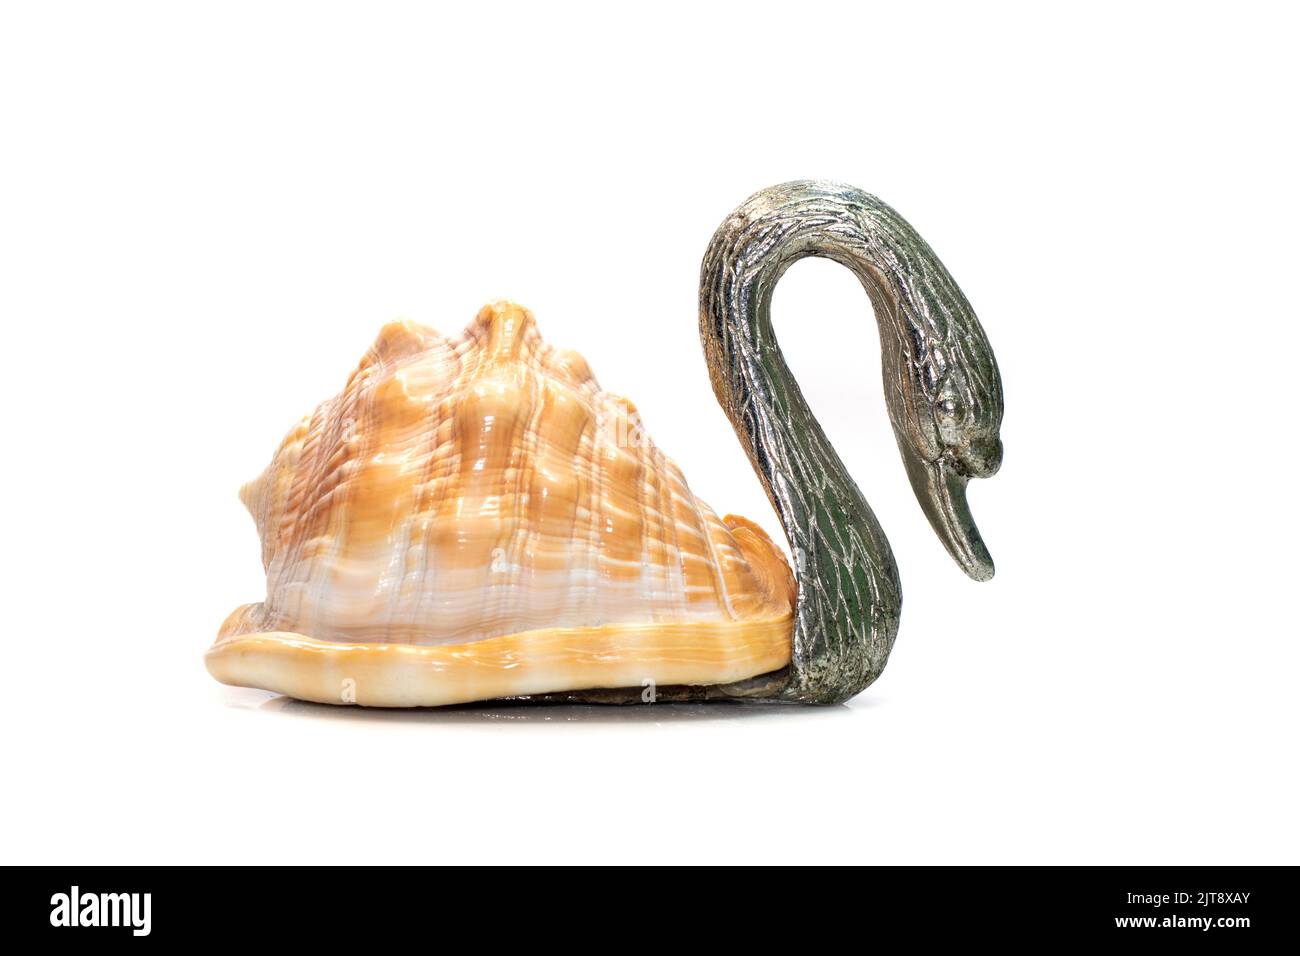 Image of swan sculpture with shells as part of its body. isolated on white background. Home decoration Stock Photo